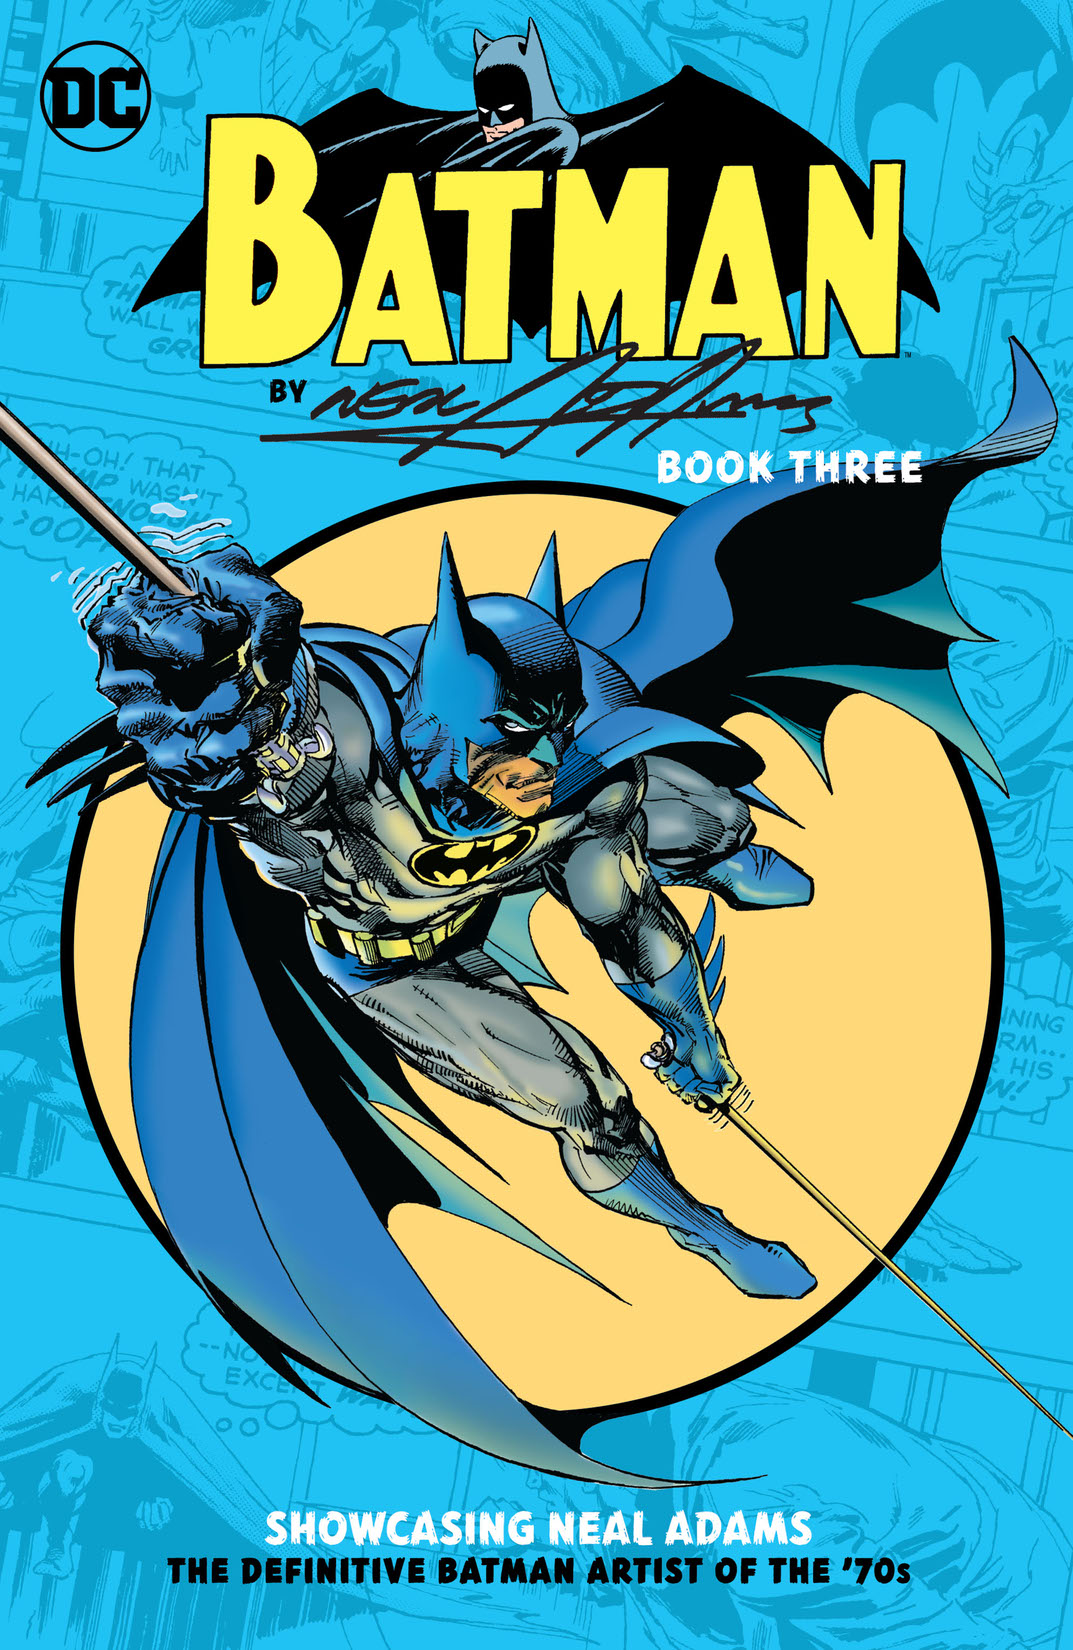 Batman by Neal Adams Book Three preview images